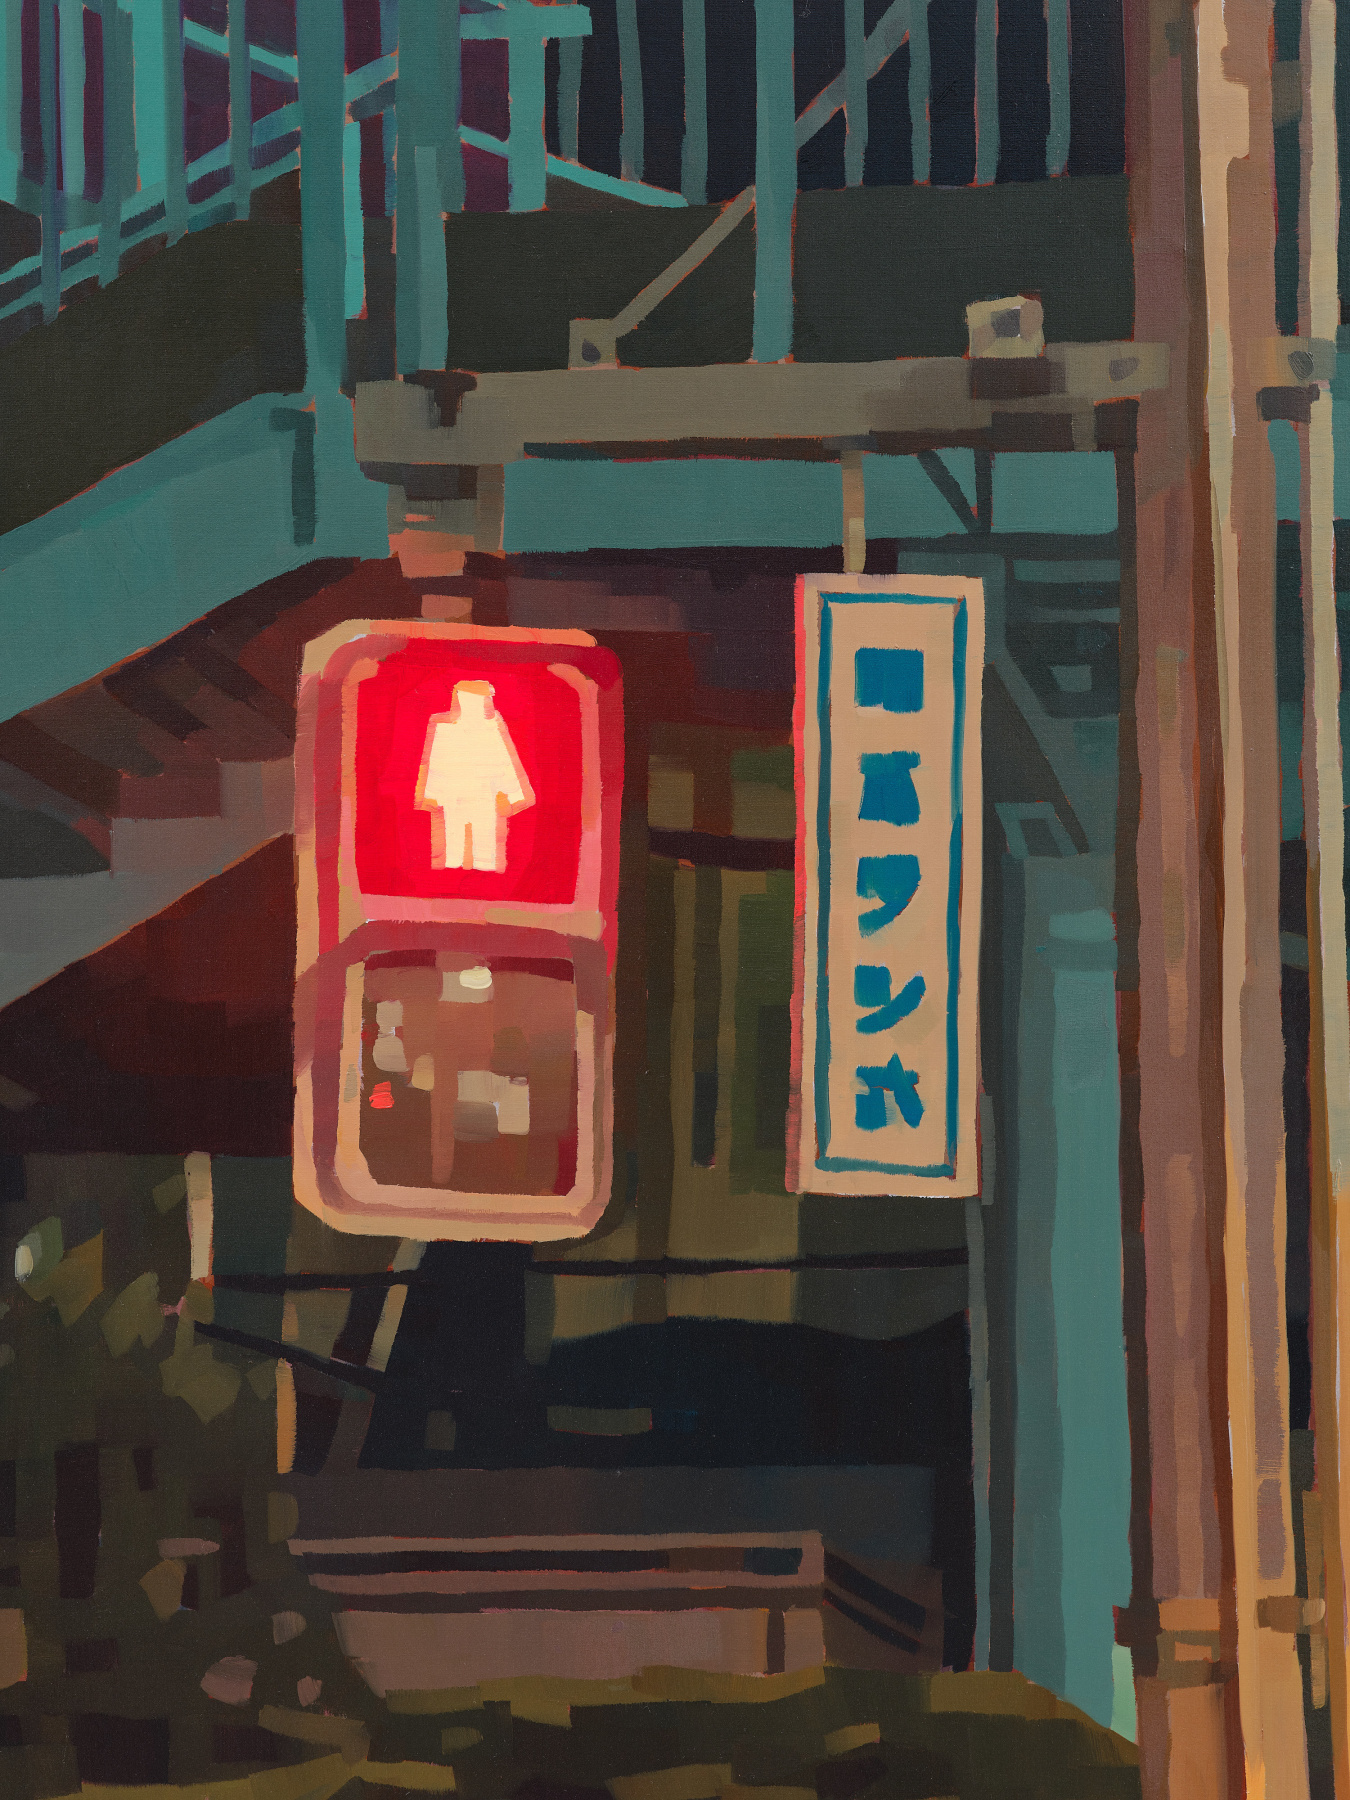 Detail of the crossing sign in Keita Morimoto's "Midnight Mirage". A painting of three people waiting for a crosswalk signal in an urban setting at night.